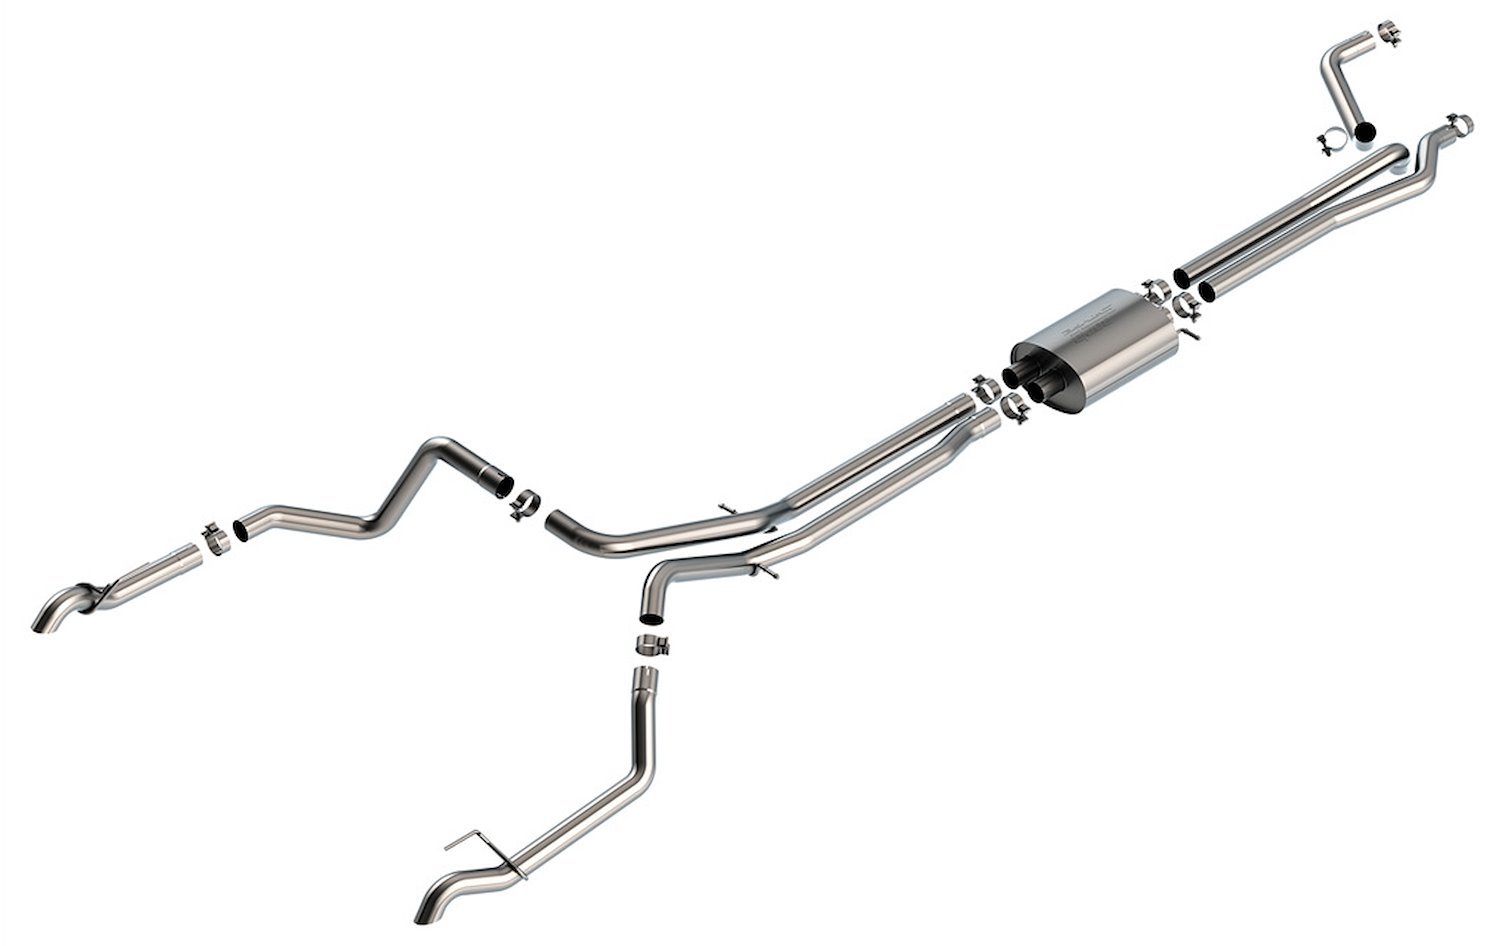 Cat-Back Exhaust System Fits Select Chevy Silverado 1500 ZR2 6.2L 4WD, GMC Sierra 1500 AT4X 6.2L 4WD, True Dual [S-Type Muffler]